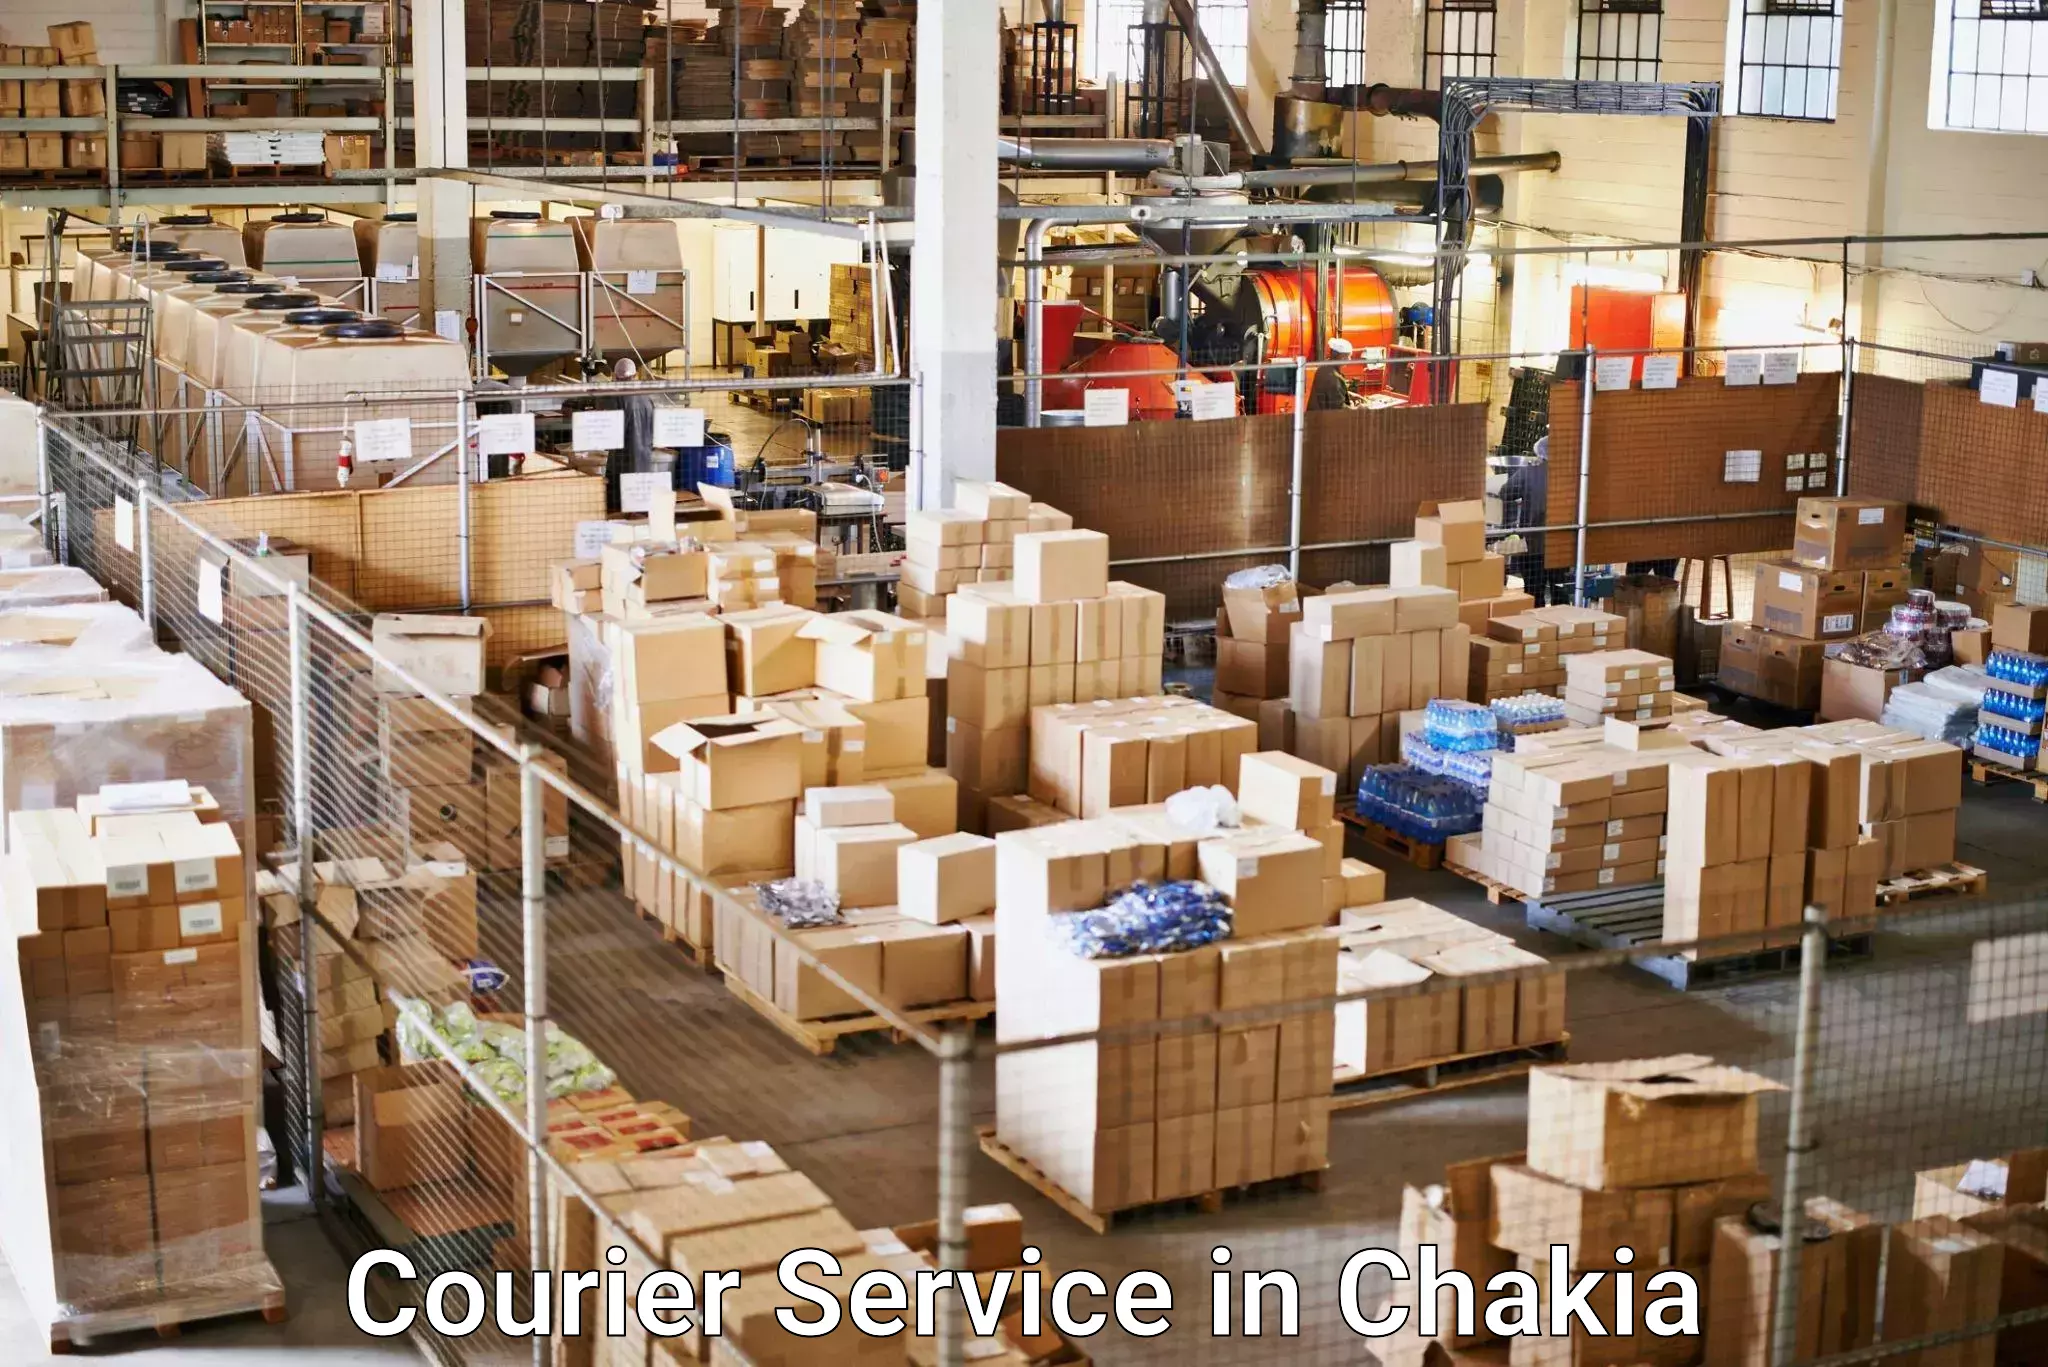 Express courier facilities in Chakia